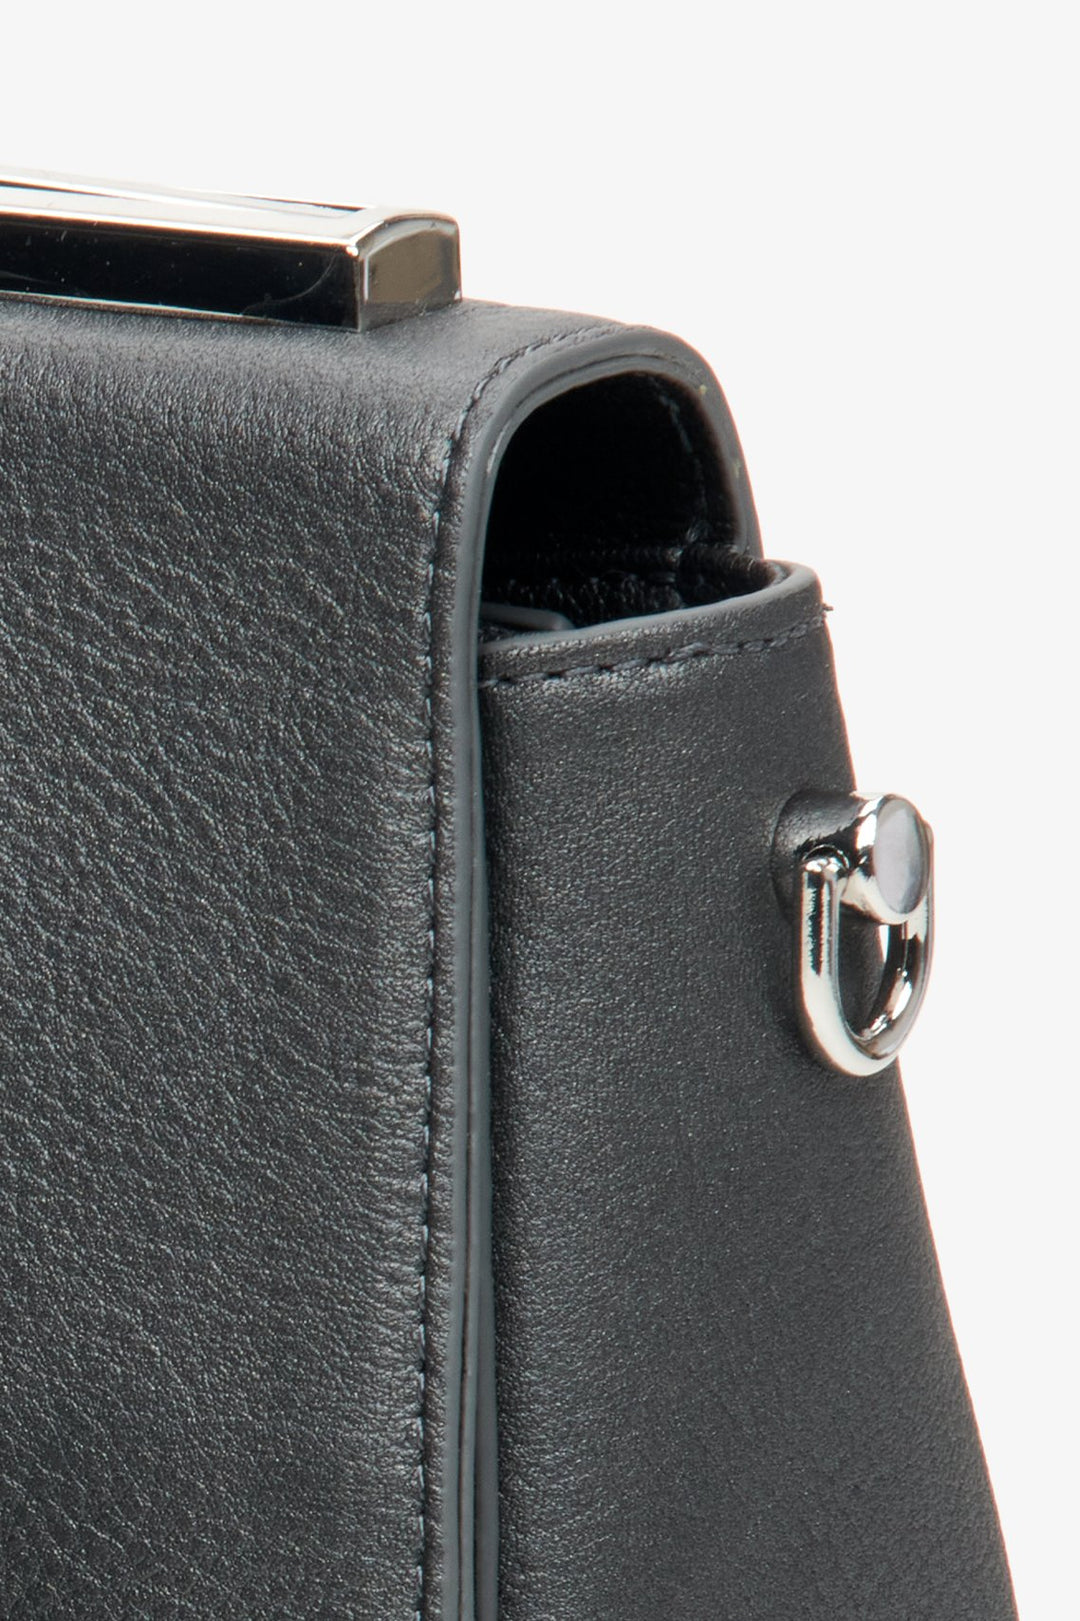 Women's small, leather bag by Estro in grey - close-up on details.